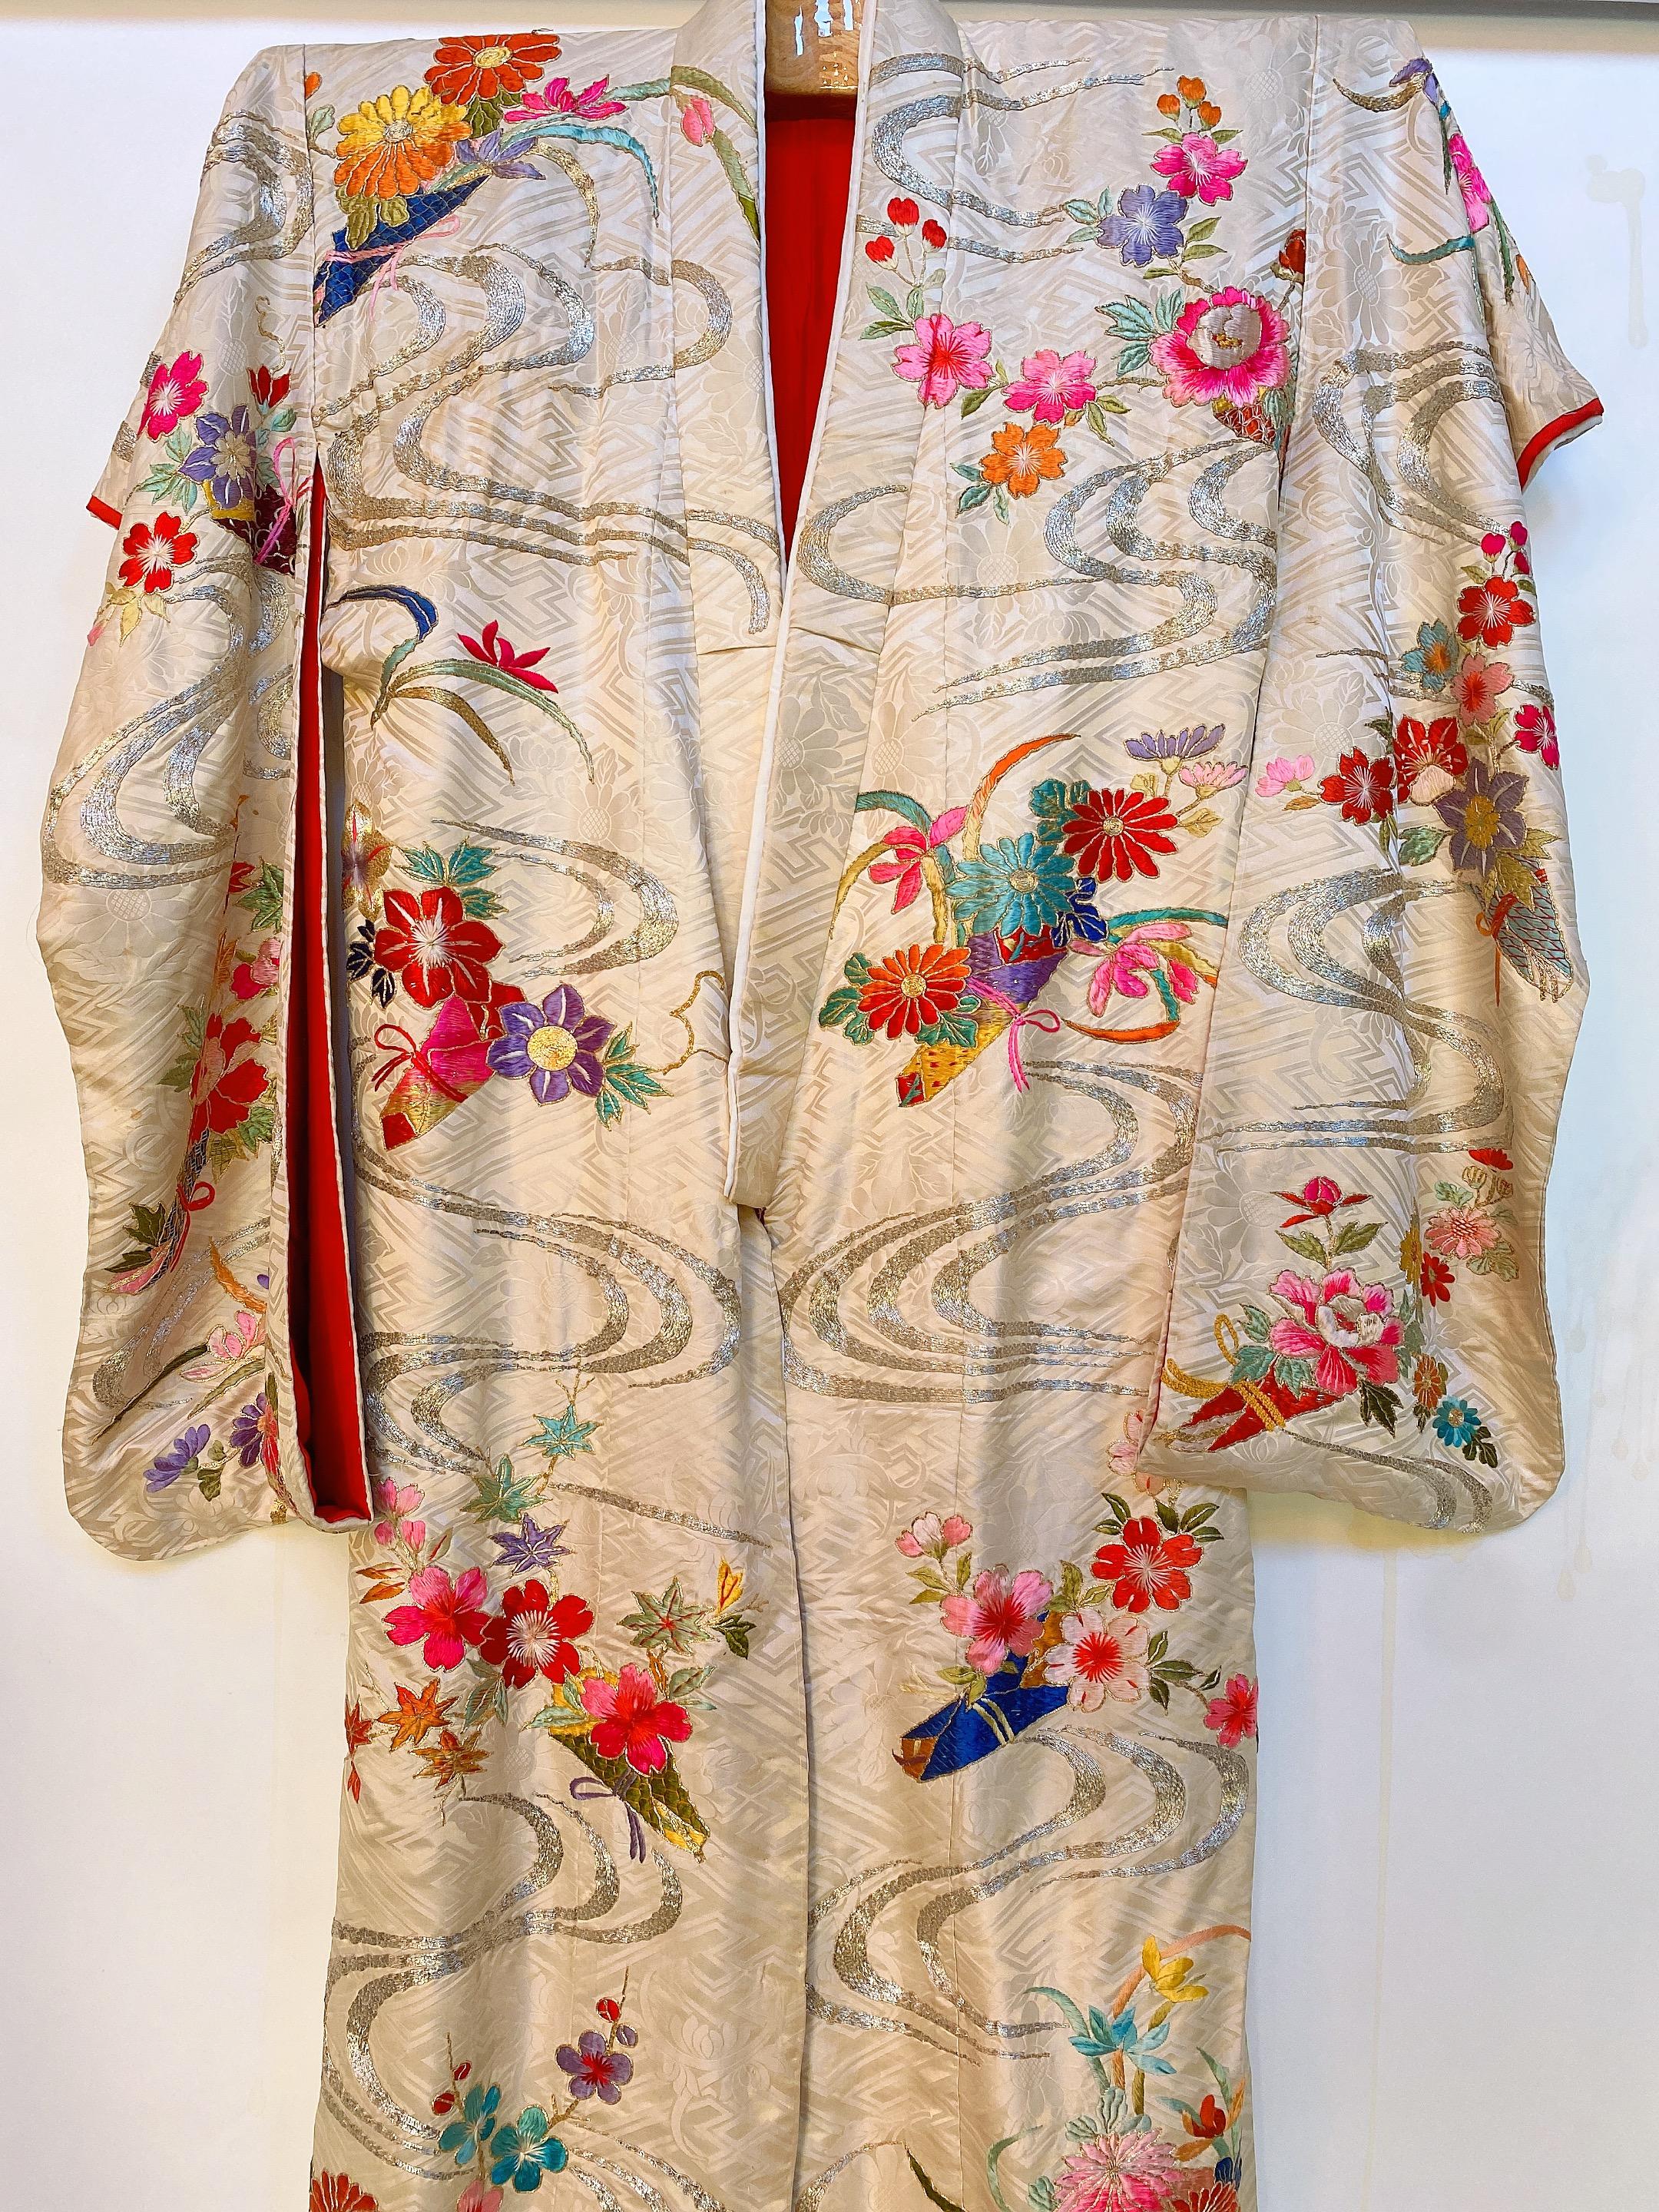 This highly collectable spectacular rare kimono has detailed hand-embroidery throughout accented . This ceremonial Japanese kimono is hand sewn and hand-quilted throughout.